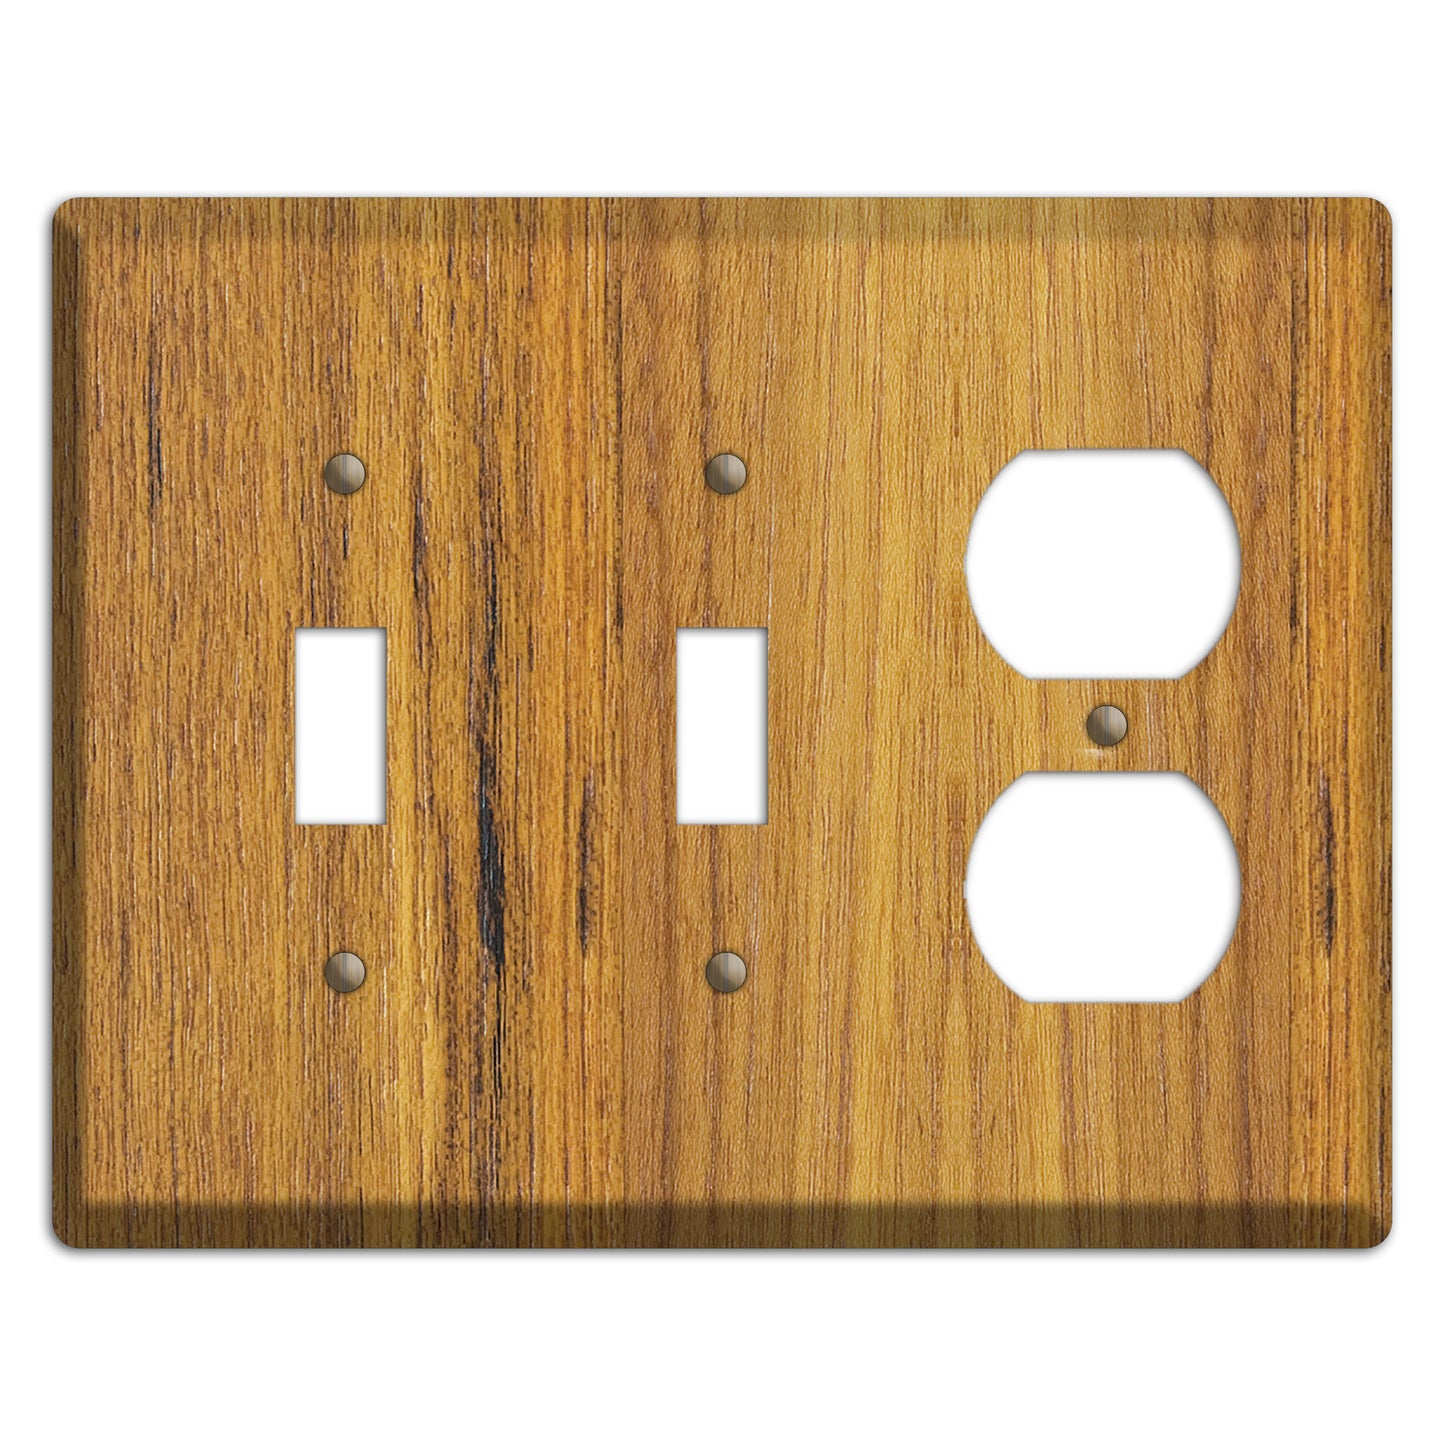 Teak Wood 2 Toggle / Duplex Outlet Cover Plate